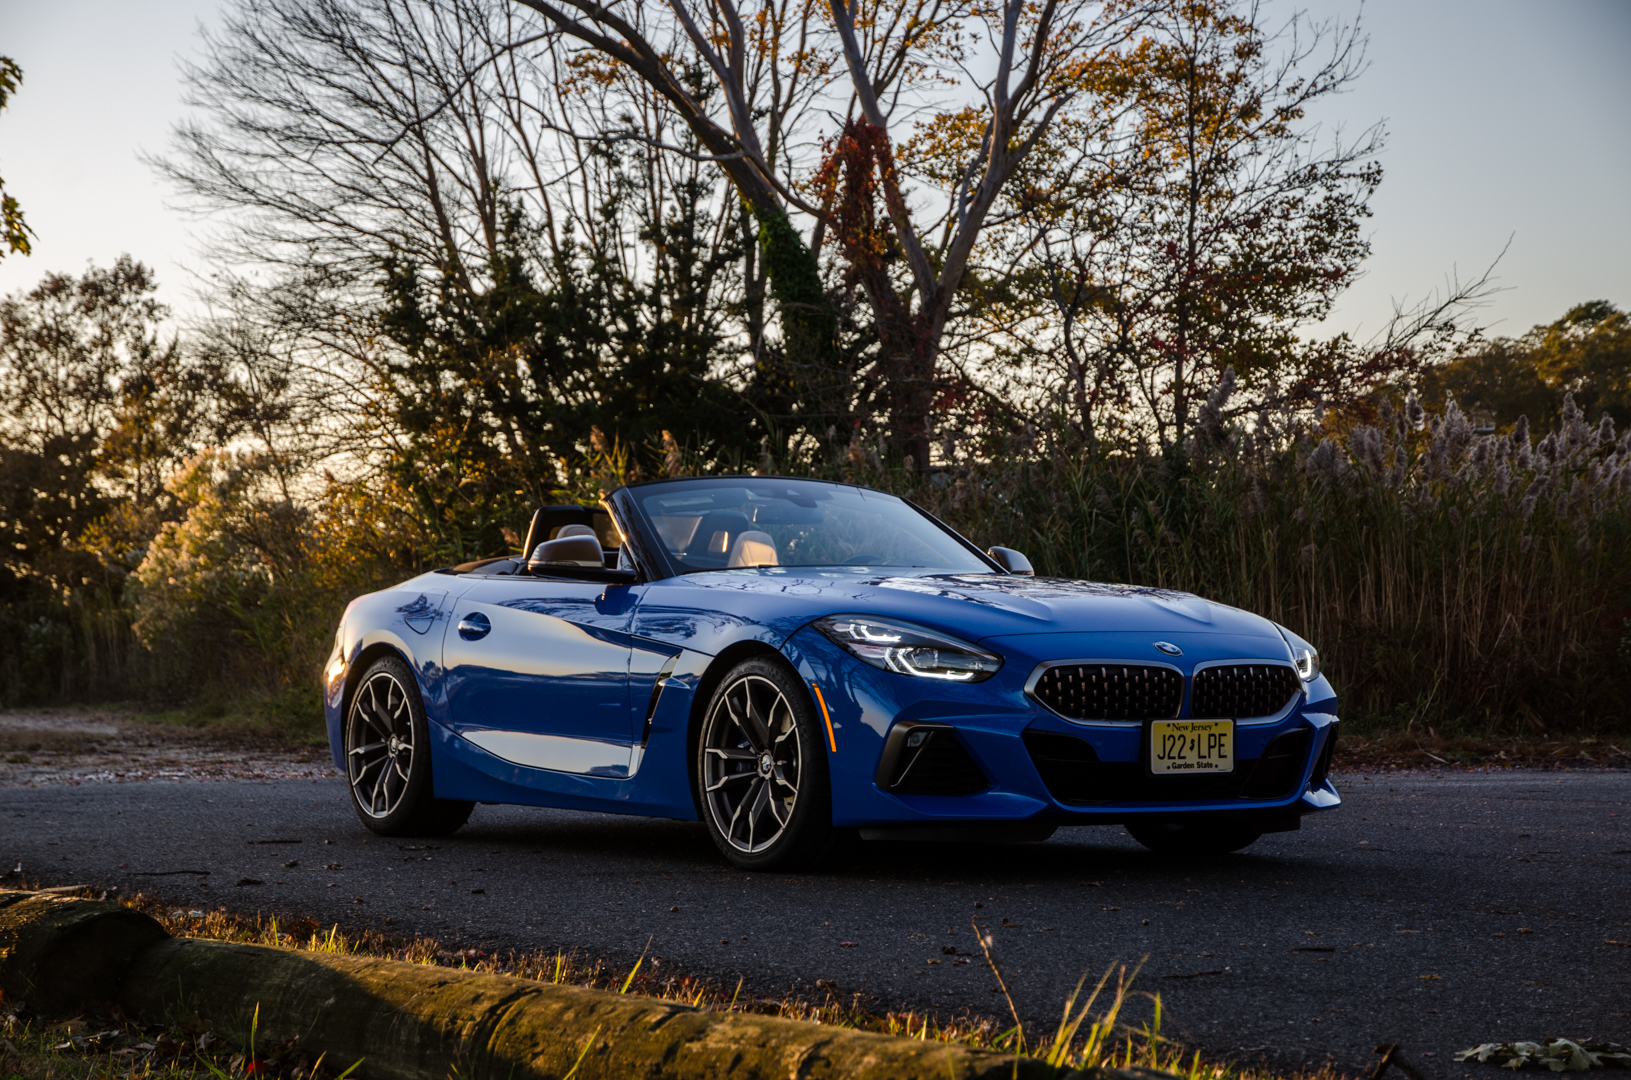 TEST DRIVE: BMW Z4 M40i -- The Most Fun BMW in a Long Time